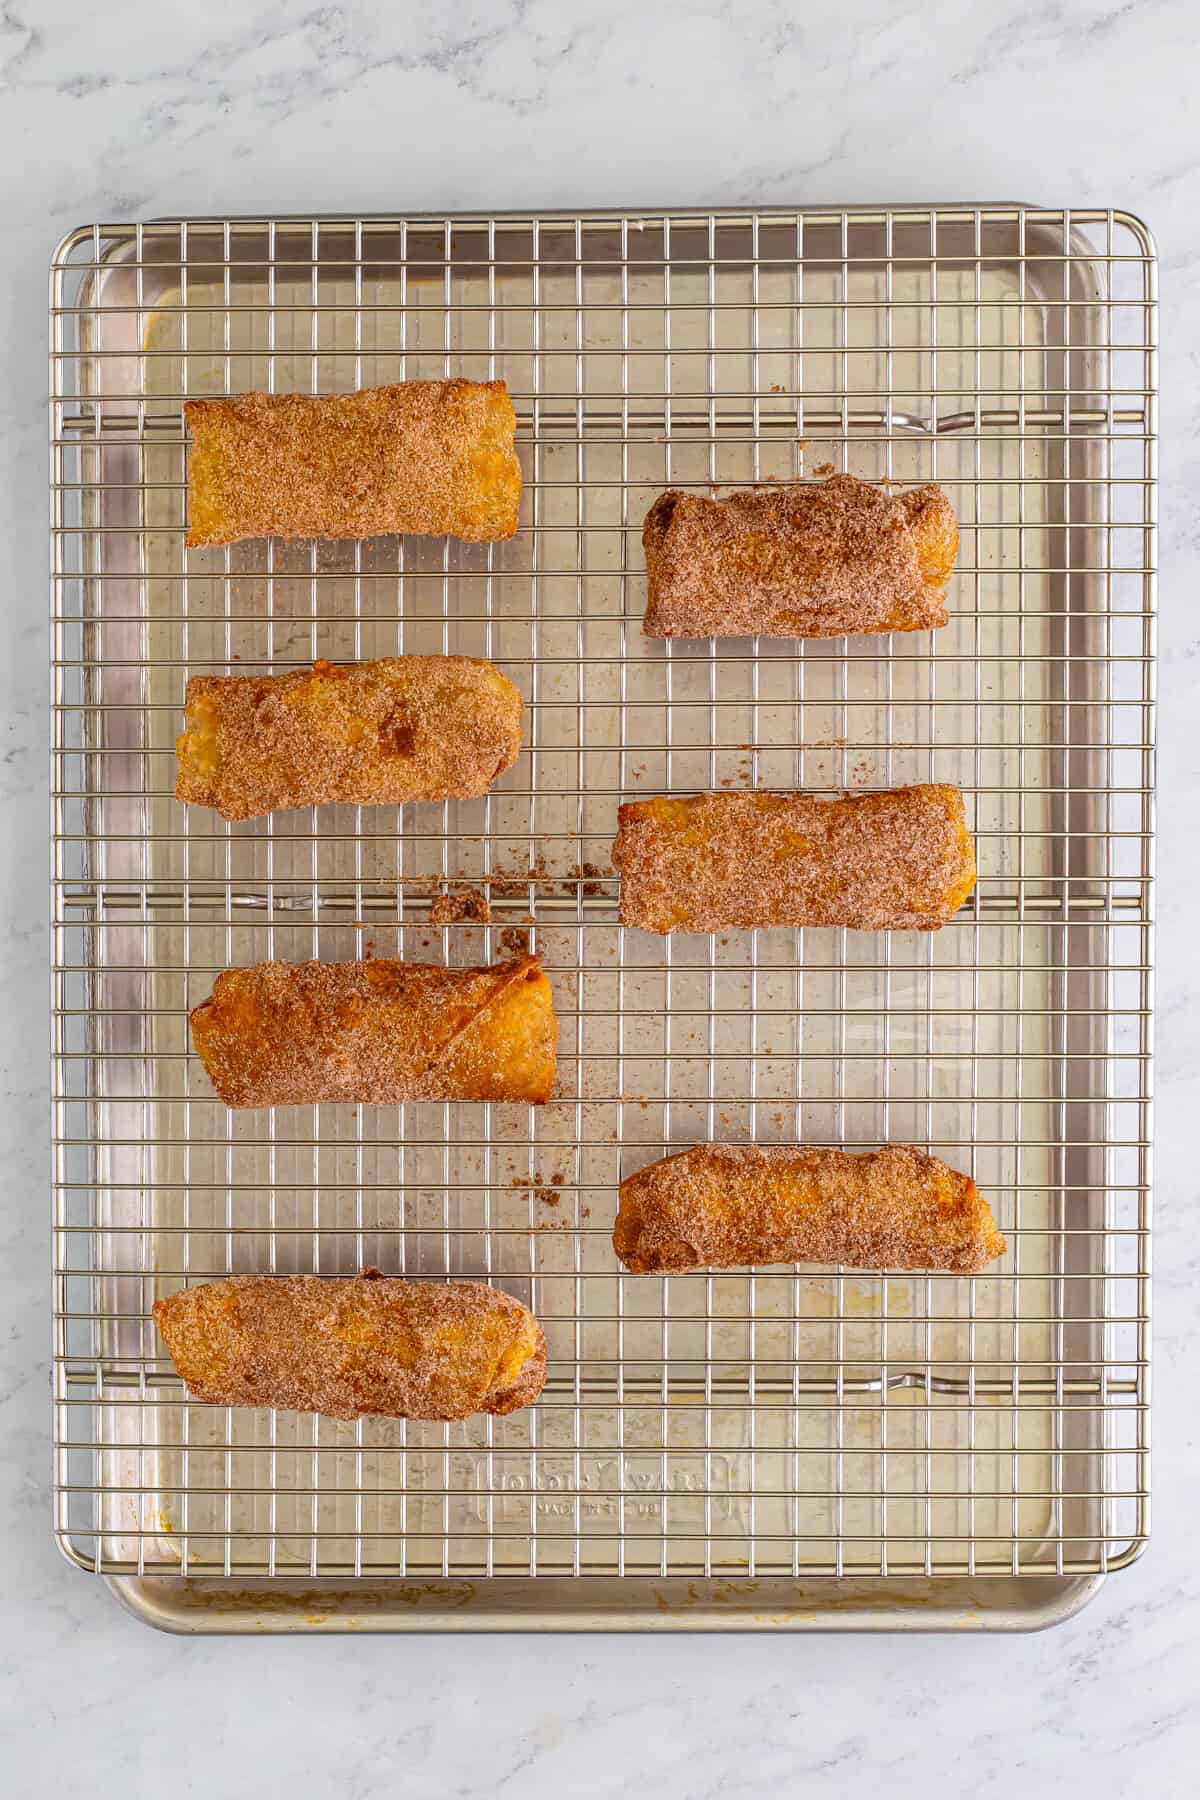 Cinnamon sugar coated egg rolls on baking sheet topped with wire rack.